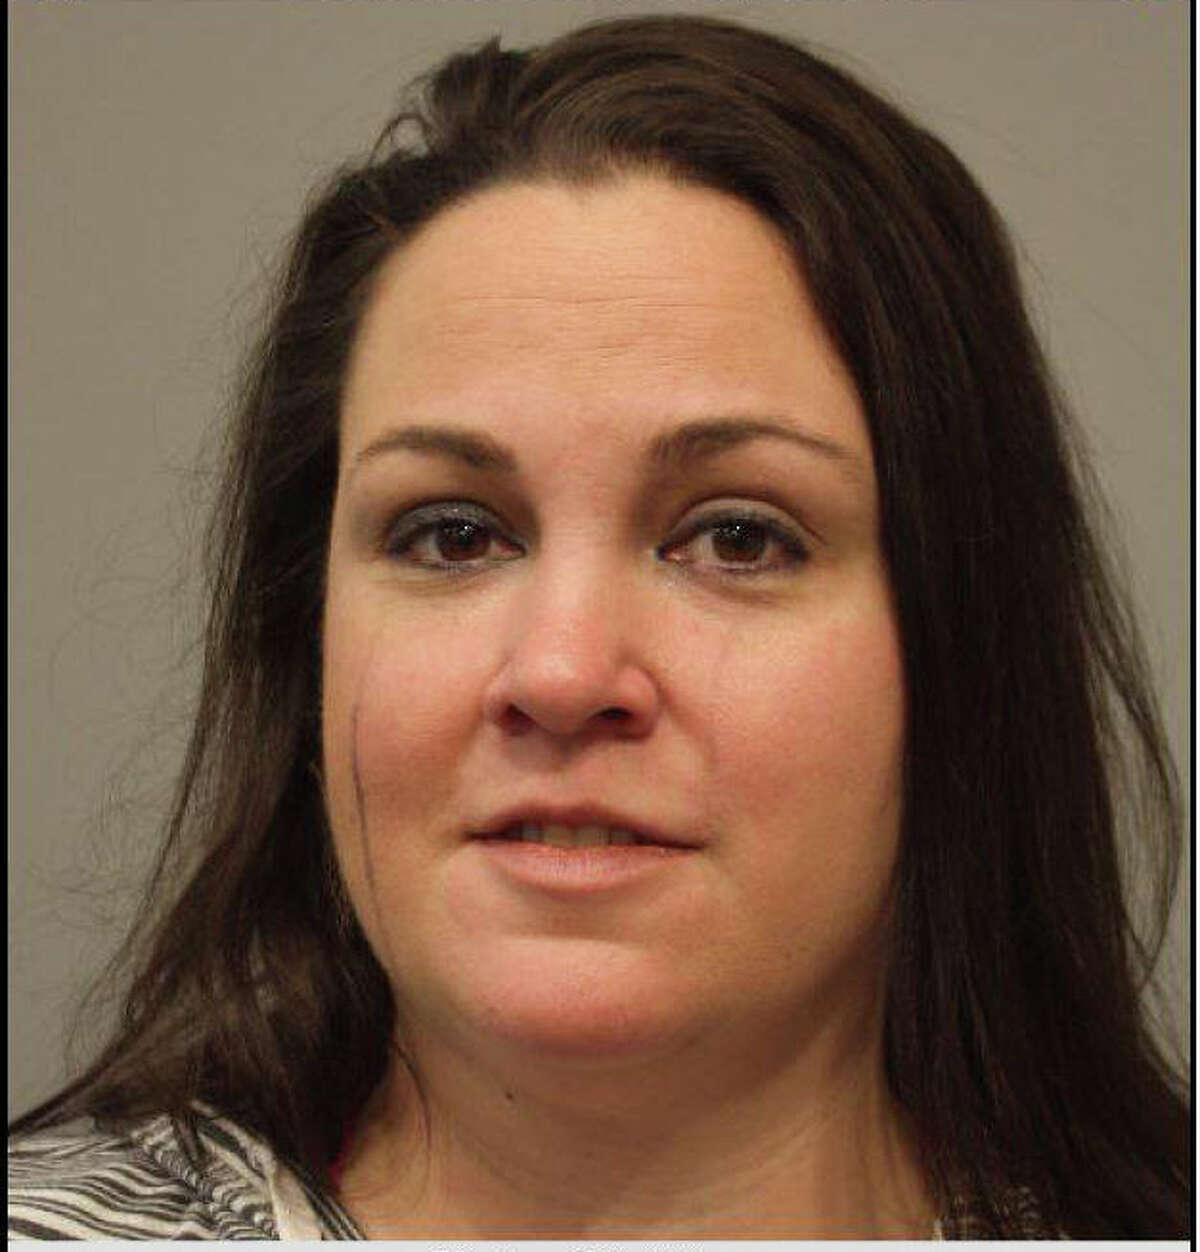 Erica Phillips was arrested for DWI on February 5, 2019. Deputies say her alcohol level was 4 times over the legal limit.